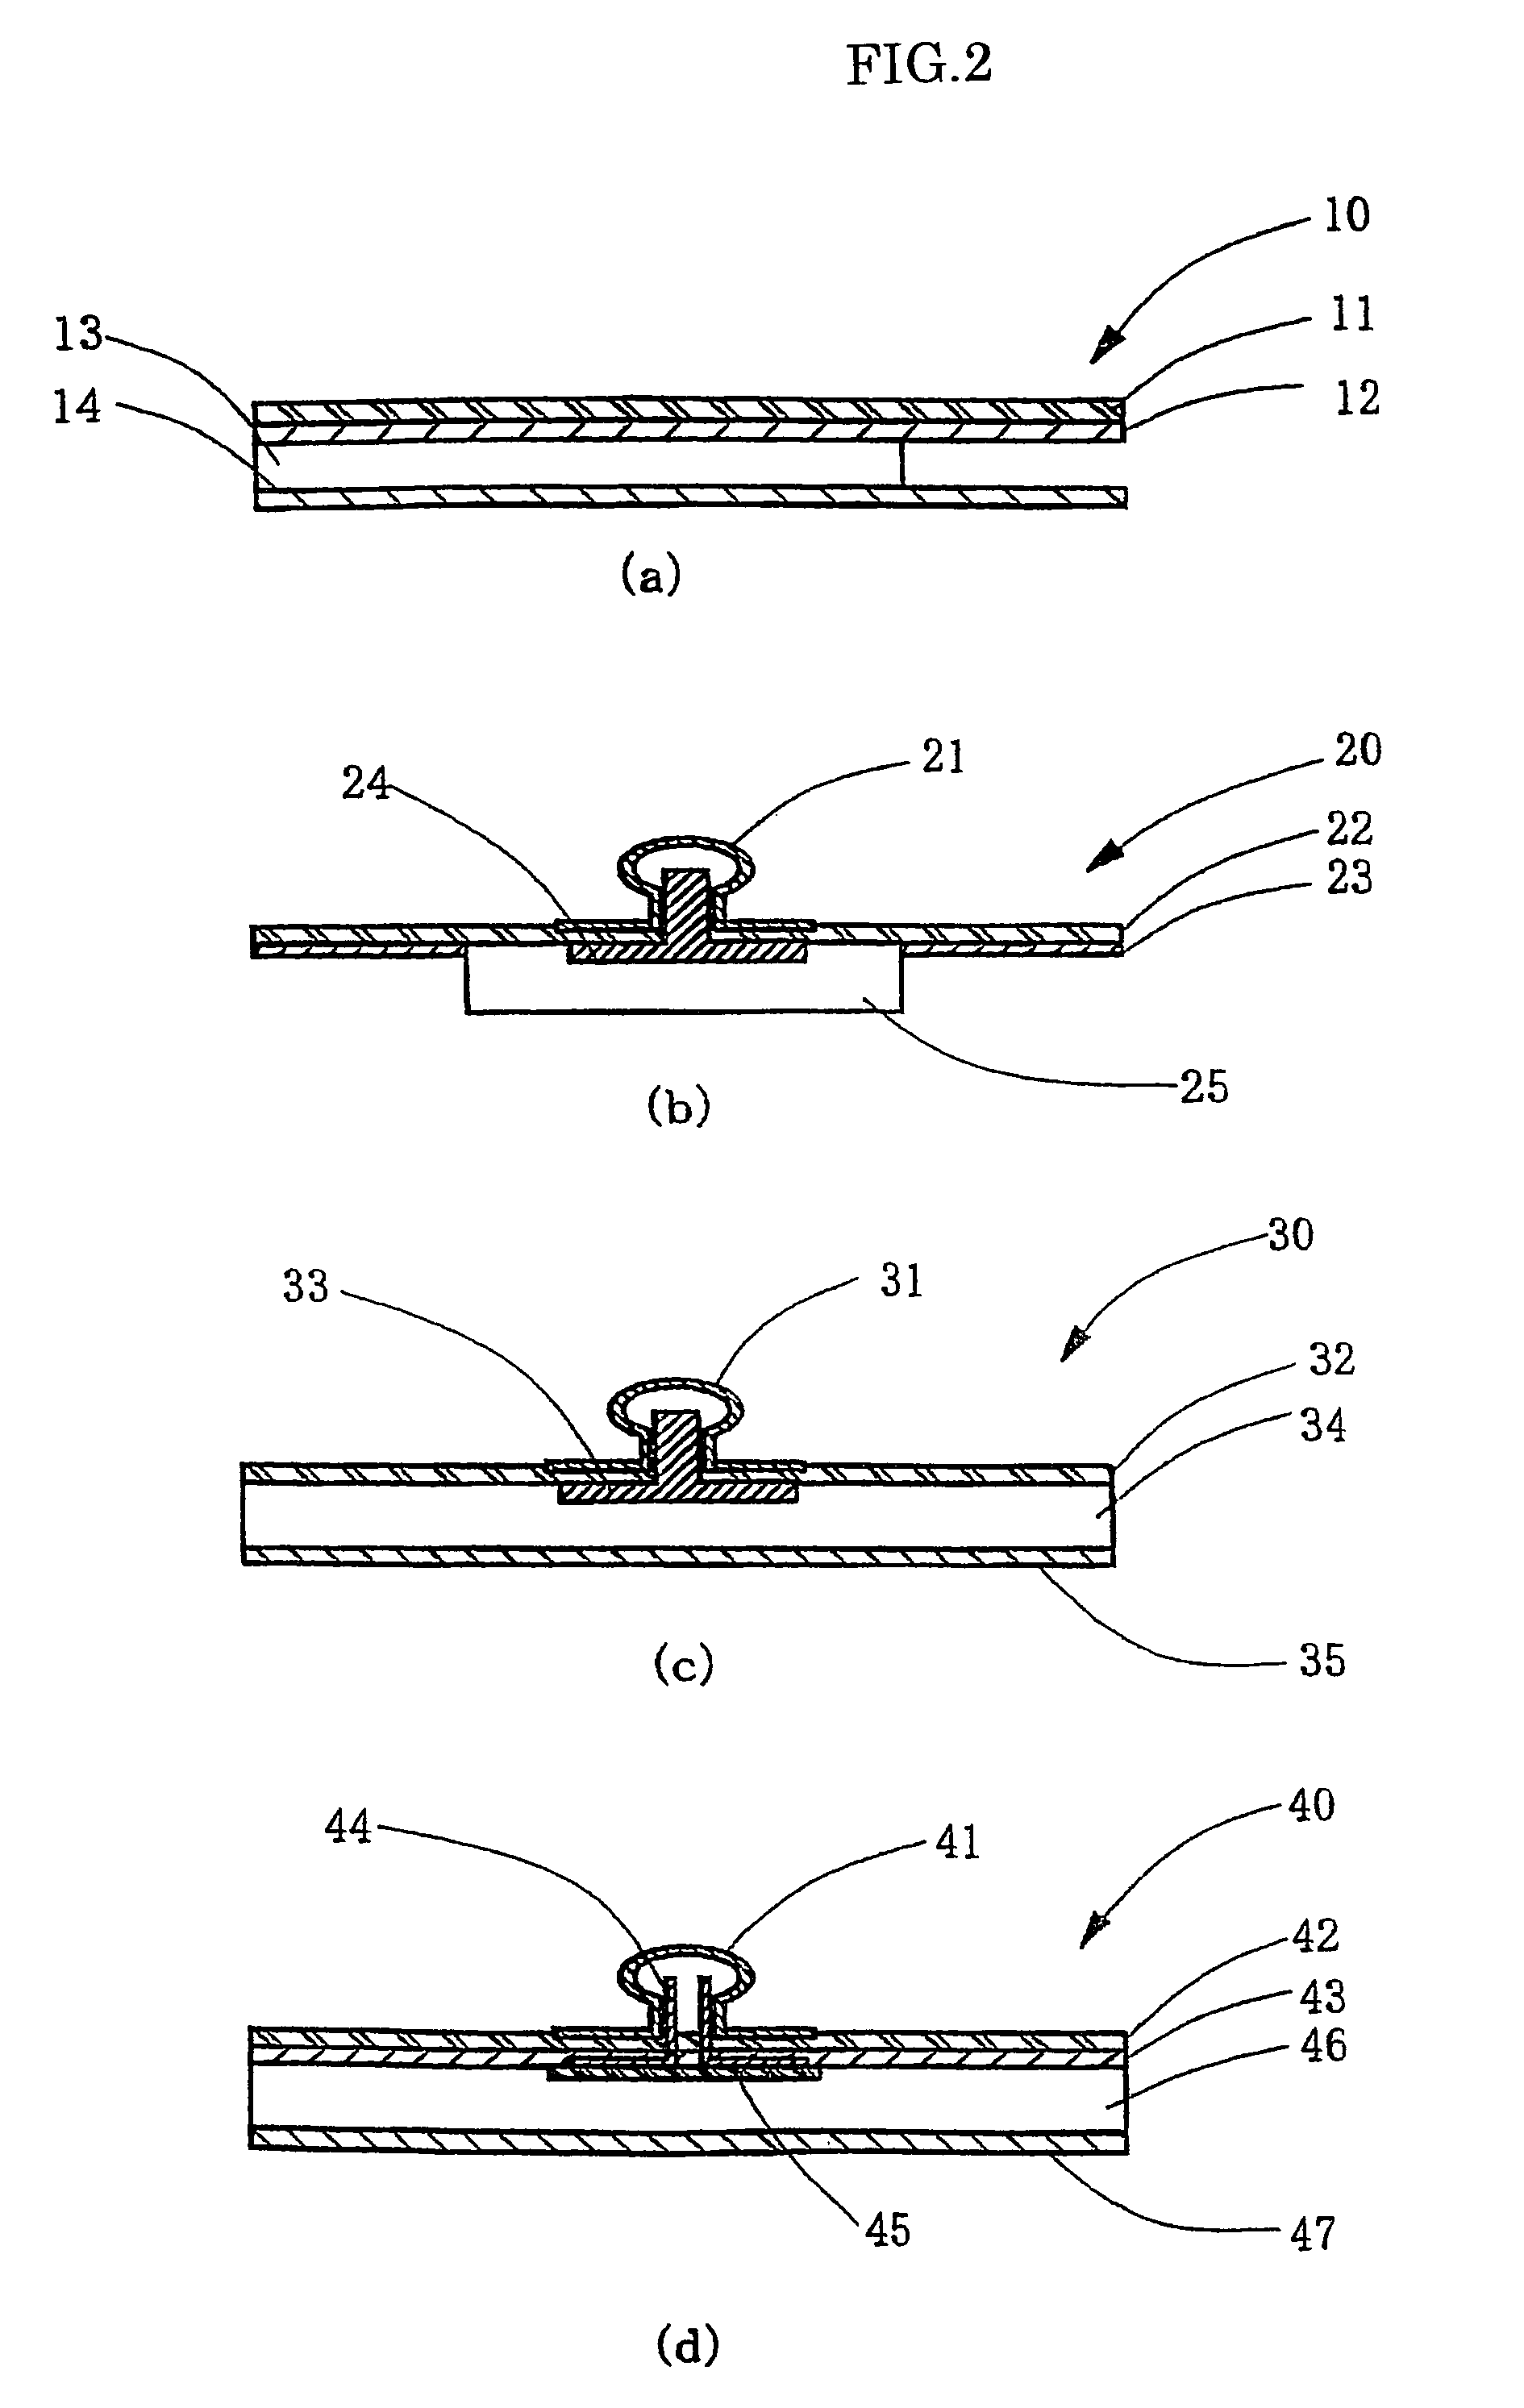 Gel adhesive compositions, method of making, and use thereof